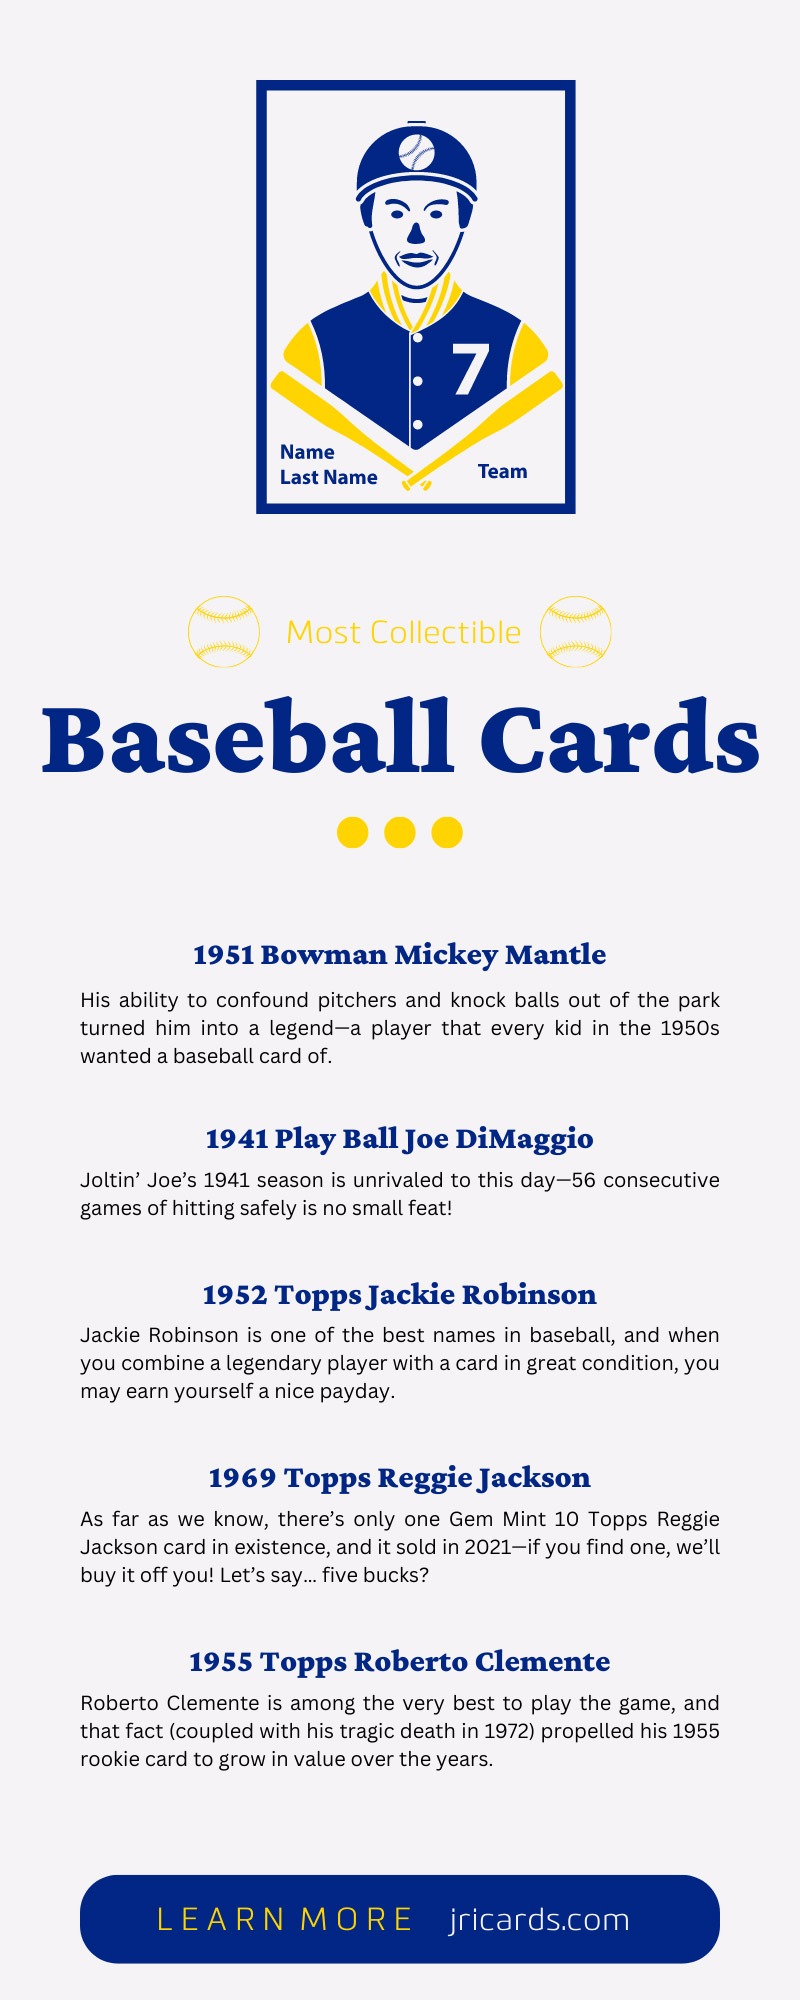 10 of the Most Collectible Baseball Cards